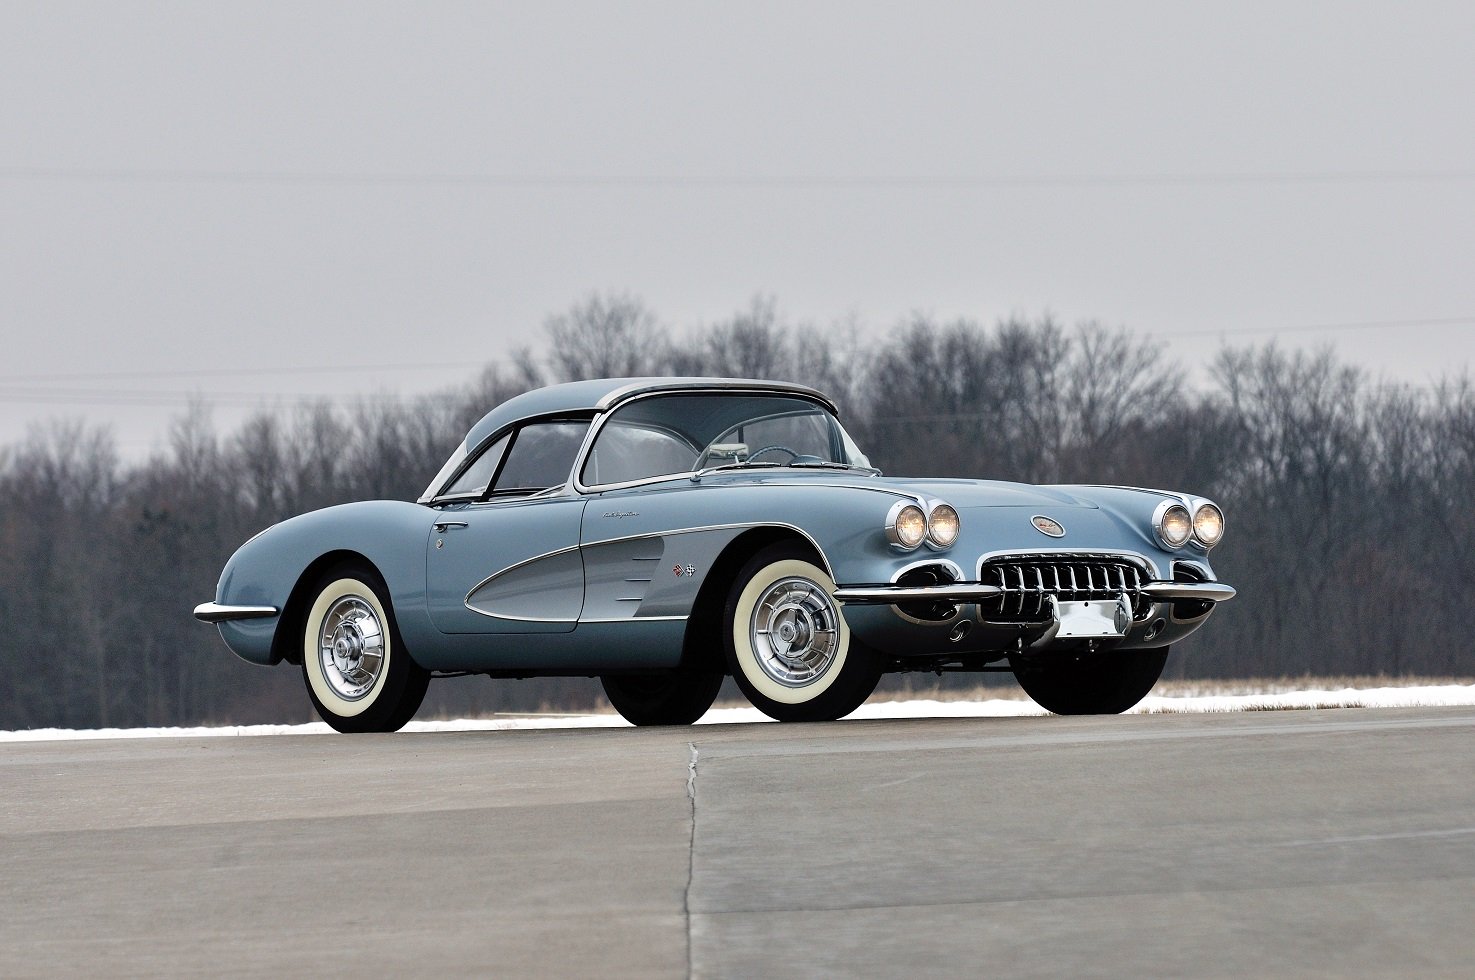 1958, Chevy, Chevrolet, Corvette,  c1 , 283 290, Hp, Fuel, Injection, Silver, Blue, Cars, Convertible, Classic Wallpaper